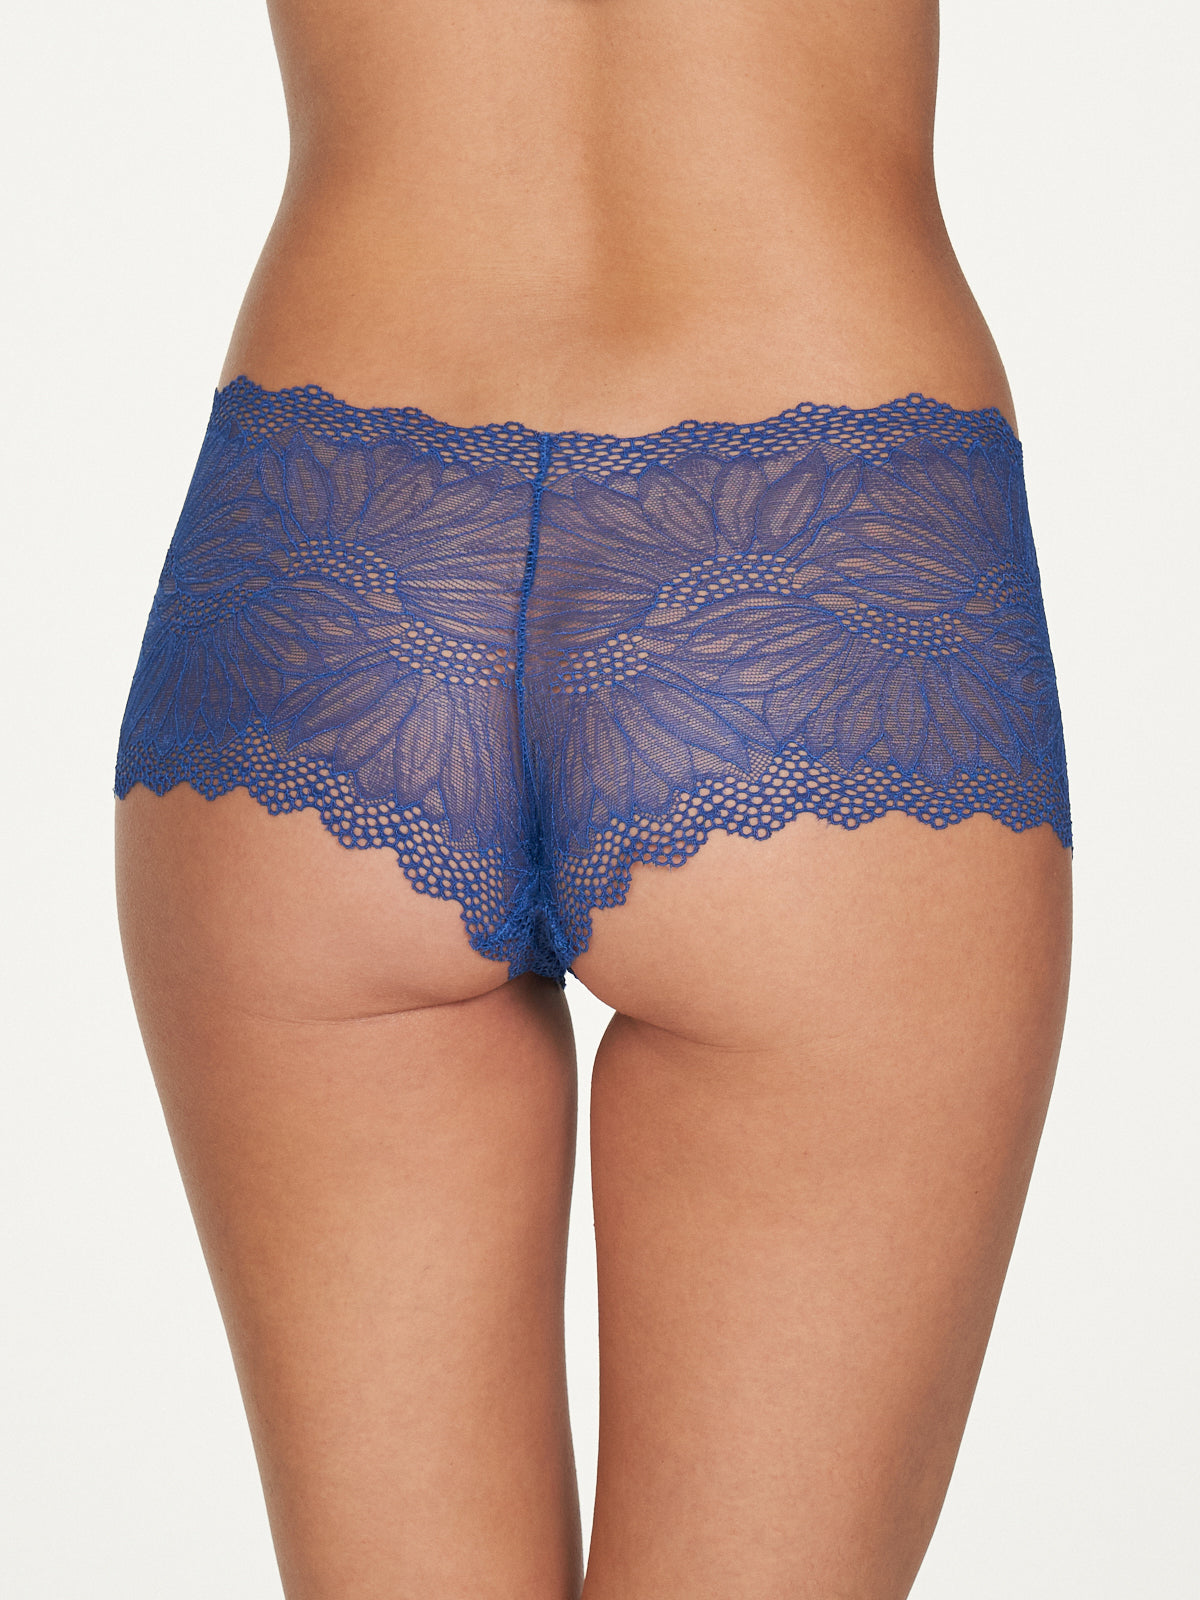 Saffron Floral Lace Cheeky - Fredericks of Hollywood